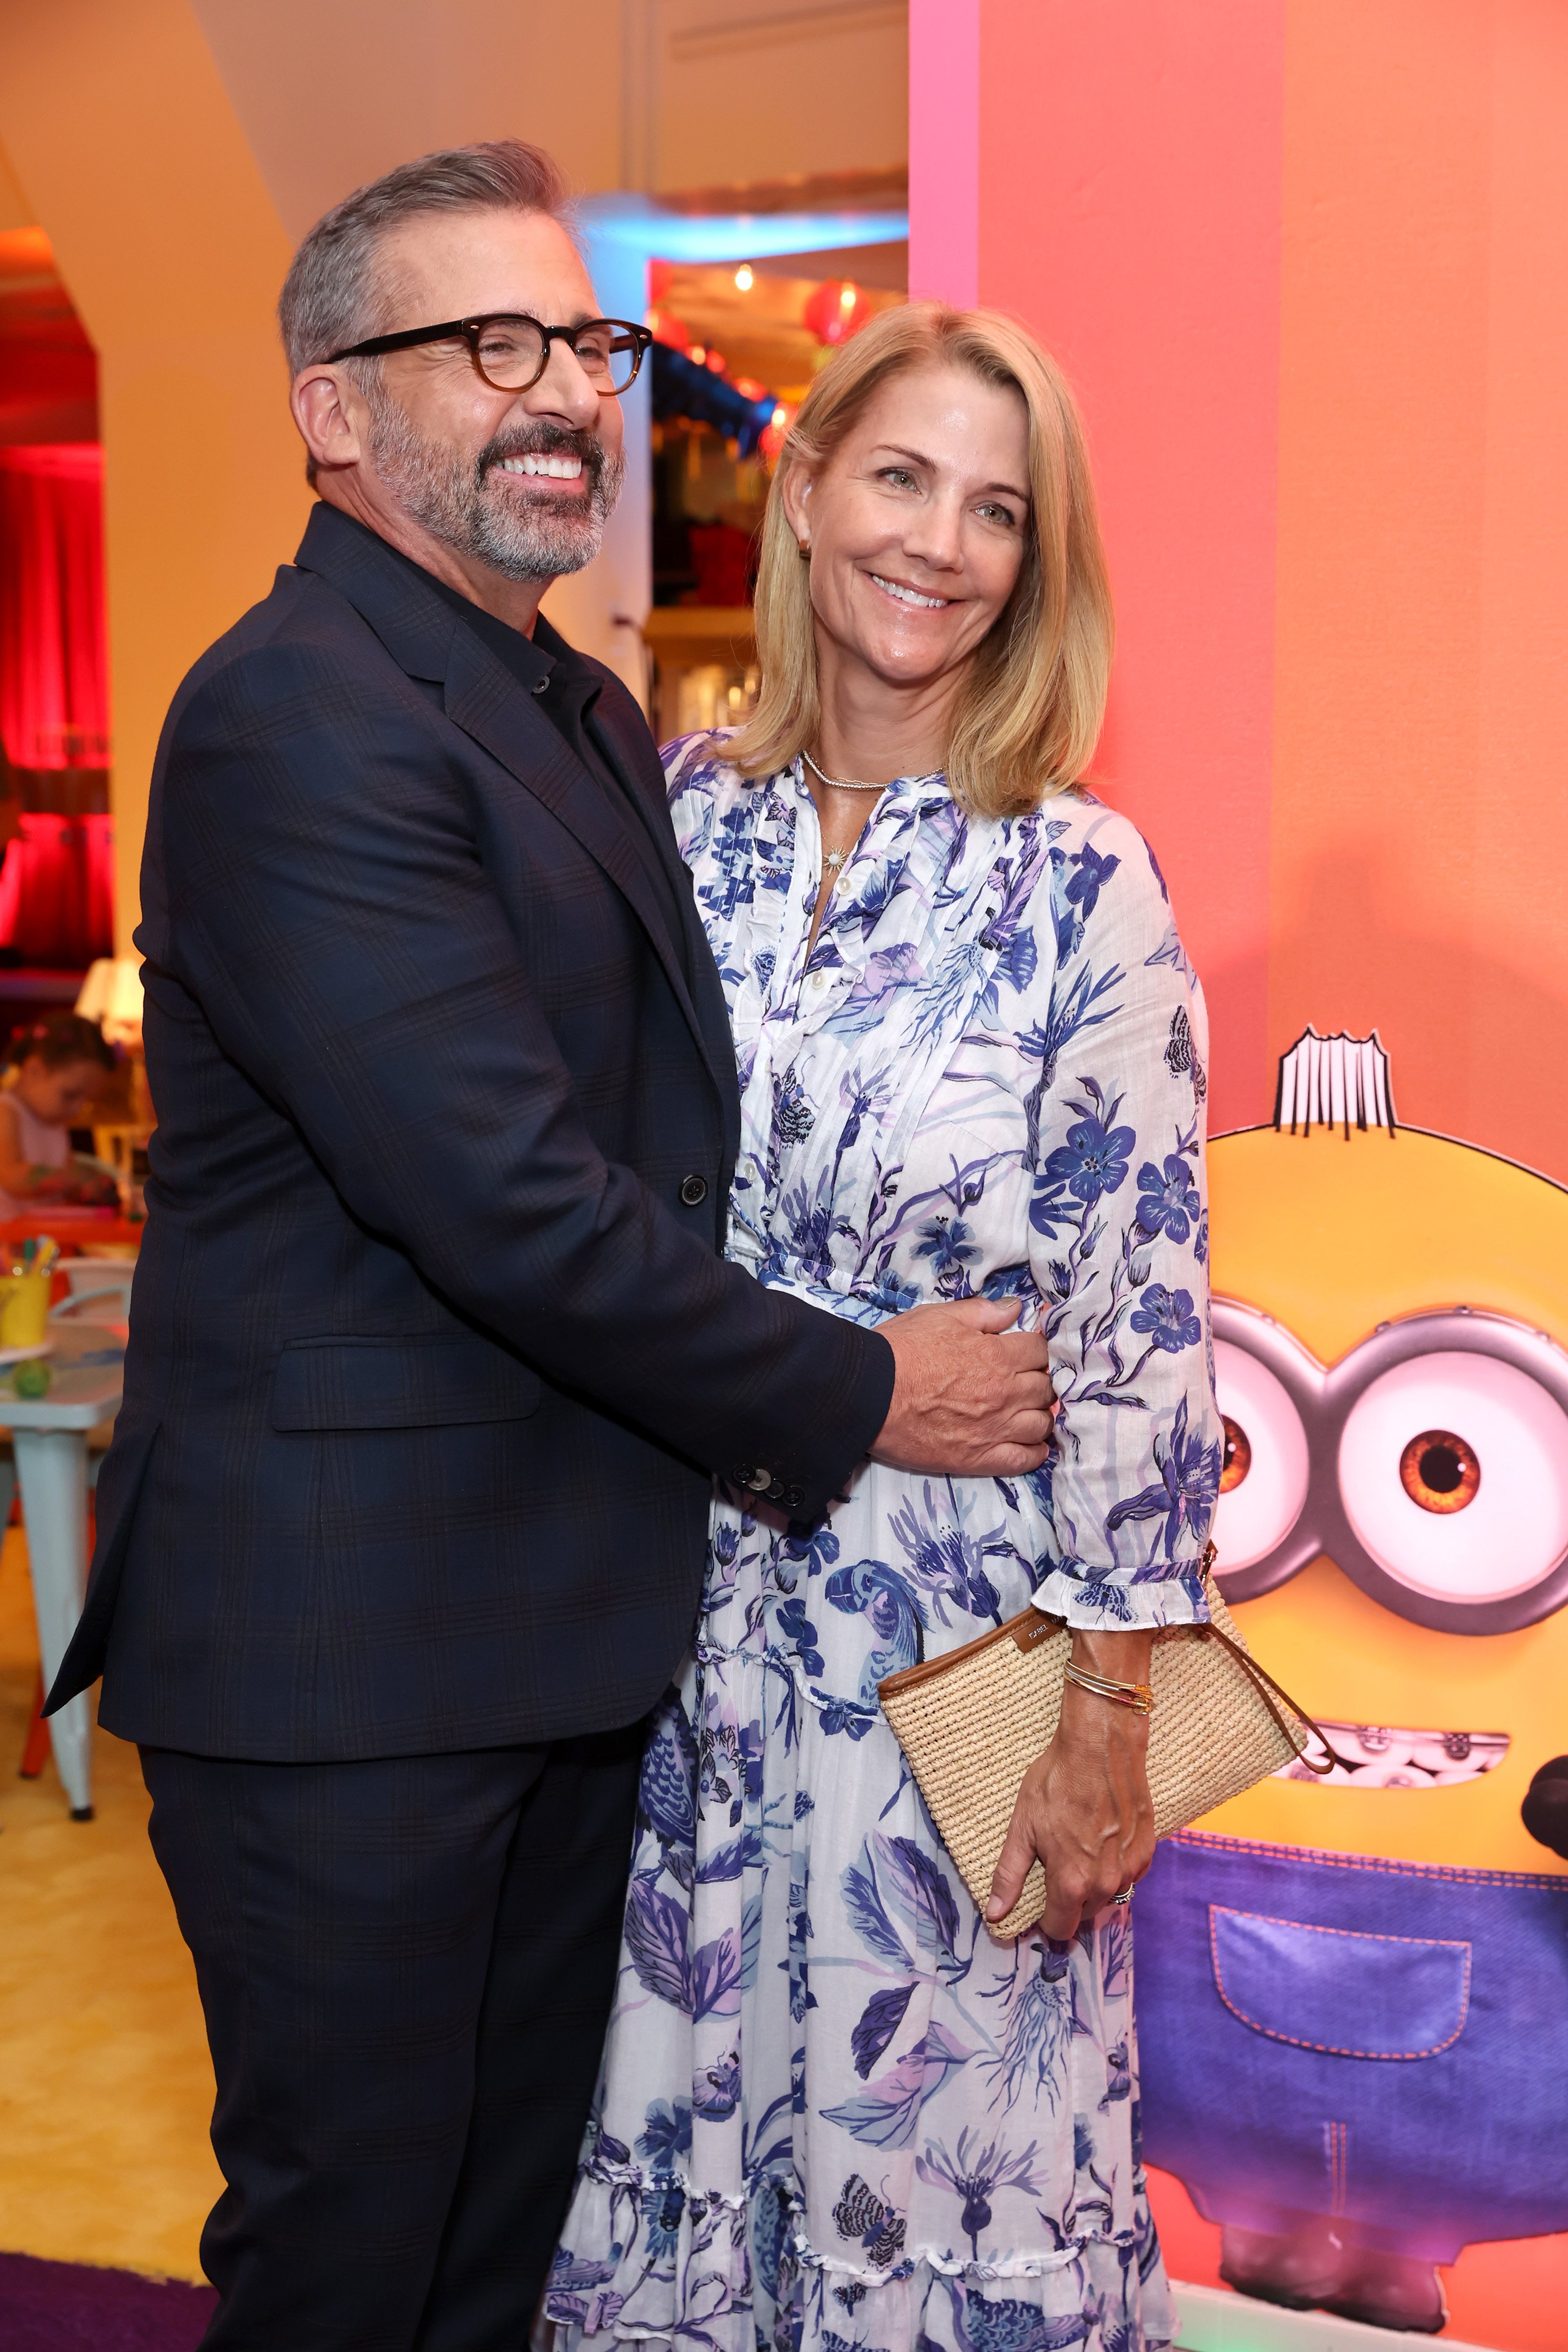 Steve Carell and Nancy Carell attend the pre-party for Illumination and Universal Pictures' "Minions: The Rise of Gru" Los Angeles premiere on June 25, 2022 in Hollywood, California. | Source: Getty Images